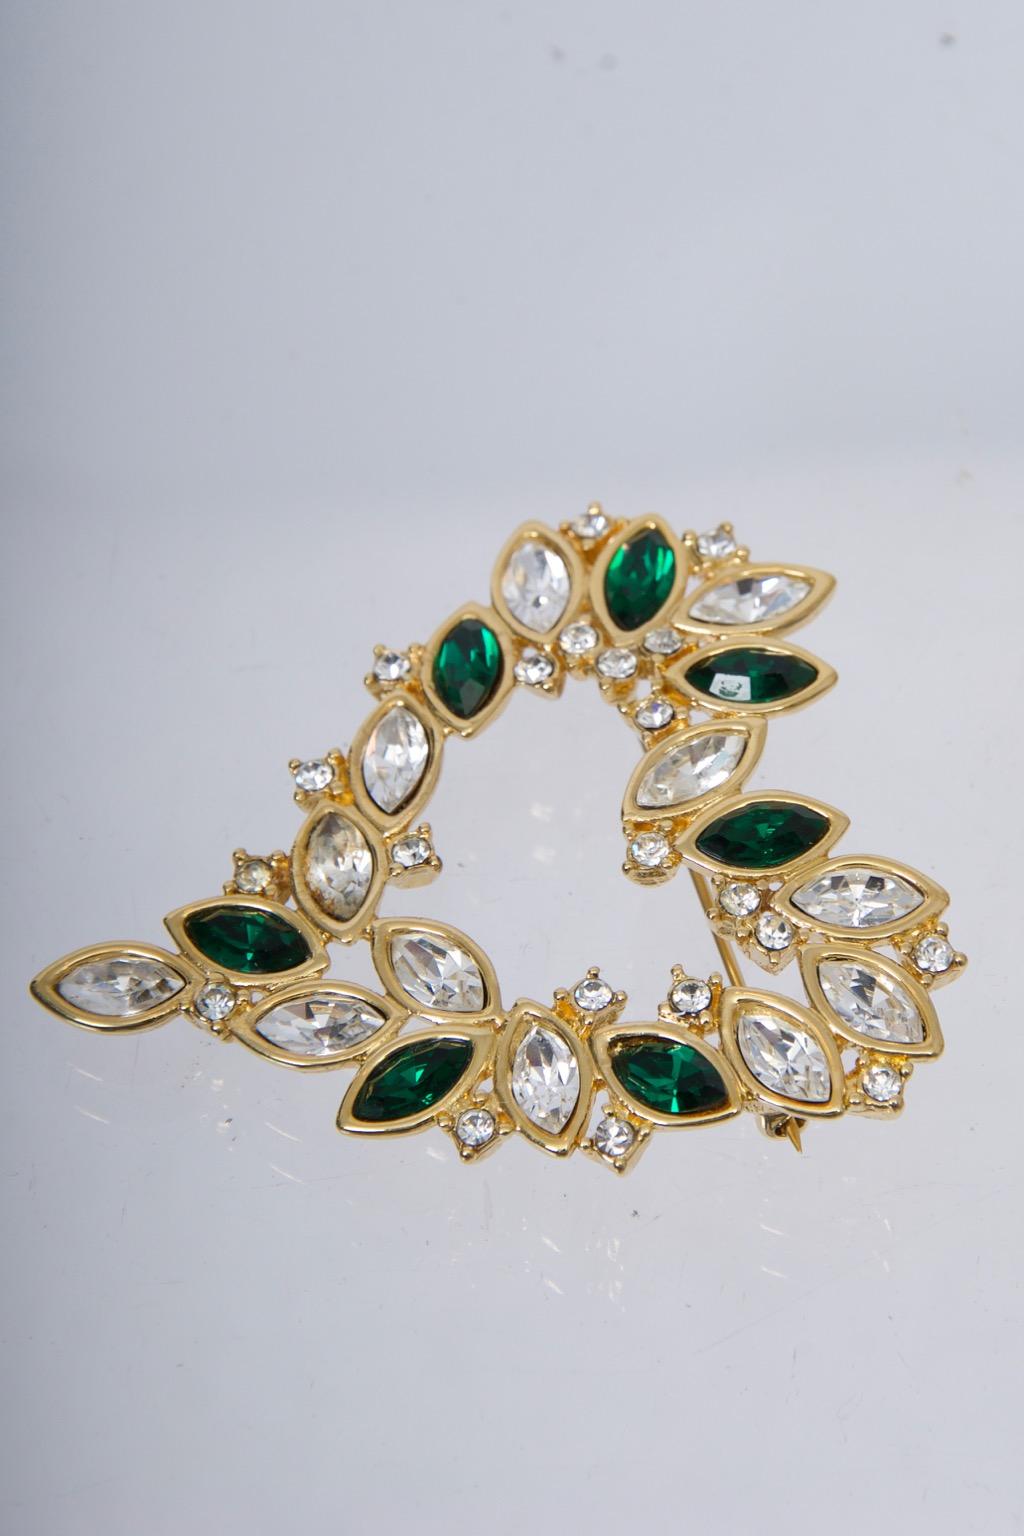 Monet heart-shaped brooch consisting of offset clear marquise crystals interspersed with emerald crystals and accented with small rhinestones, all in a gold metal setting.  Copyright Monet signature bar on reverse.